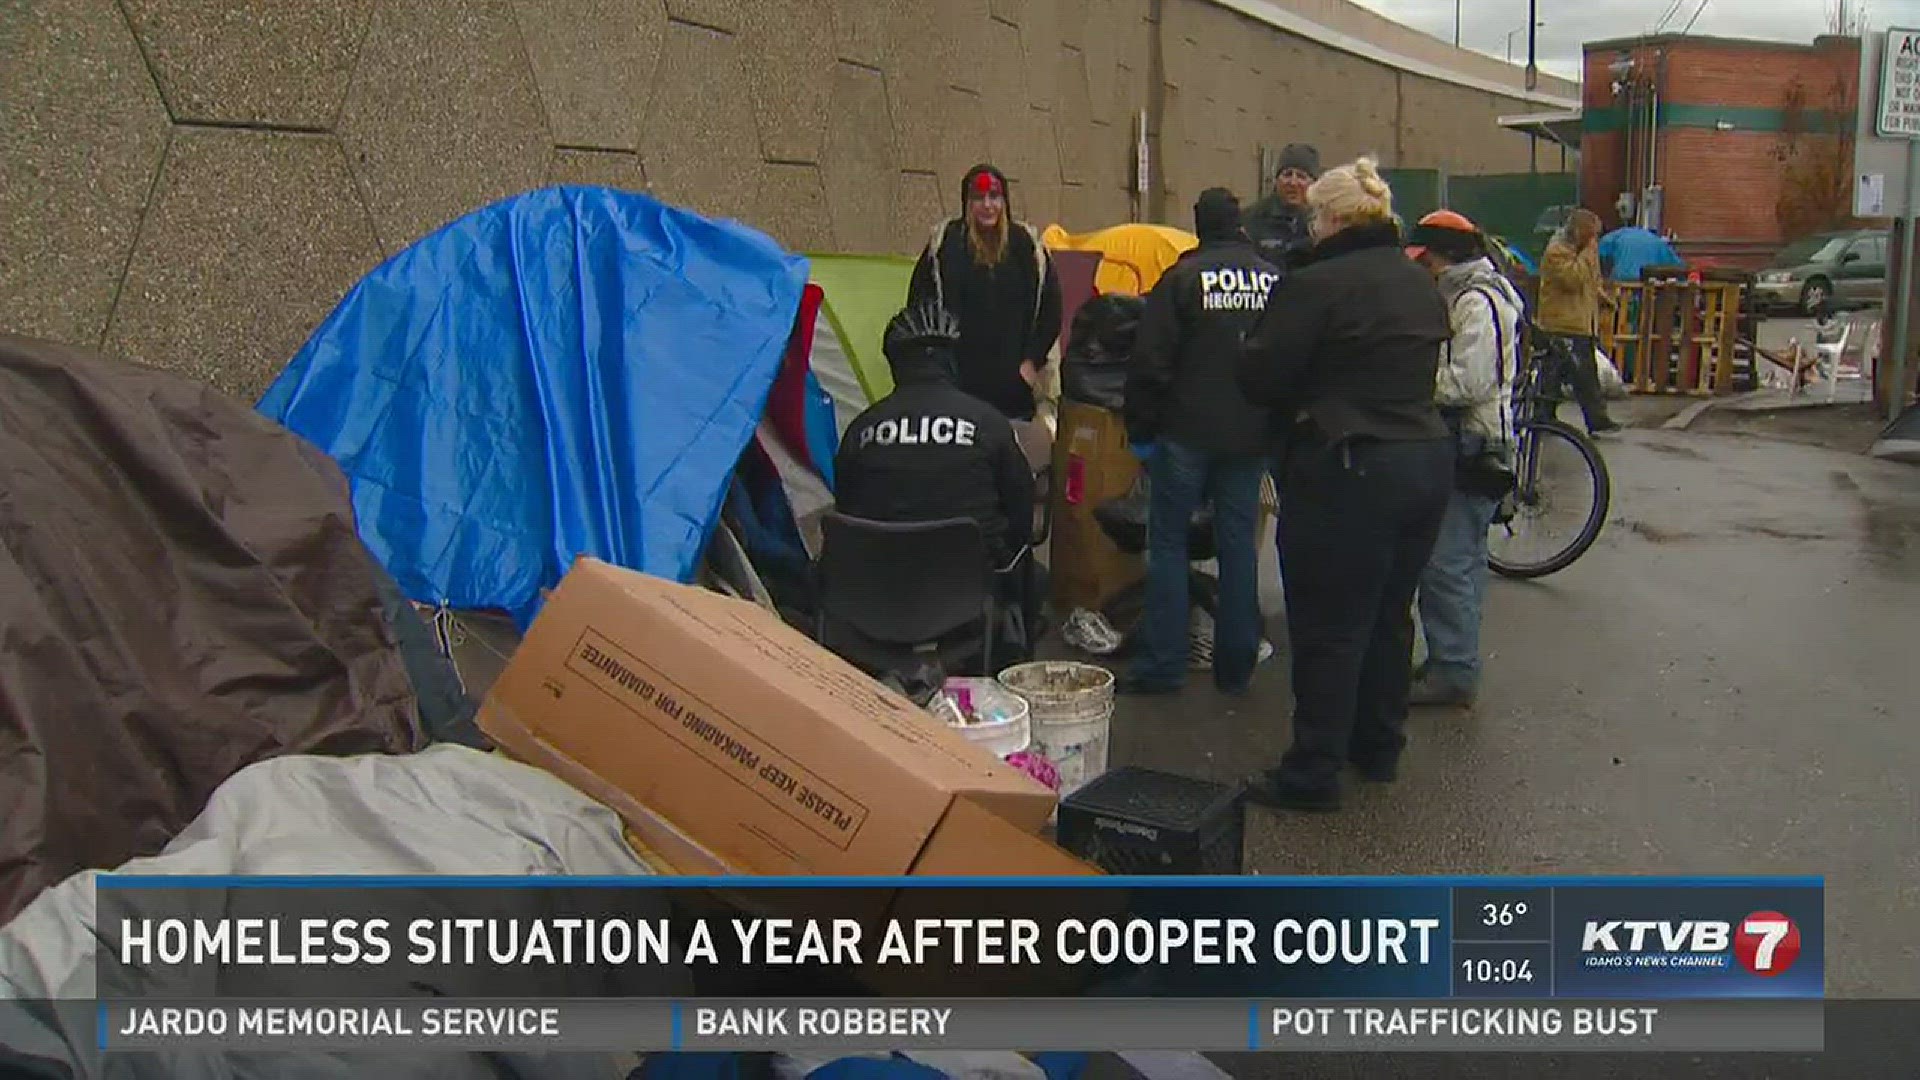 Homeless situation a year after Cooper Court.